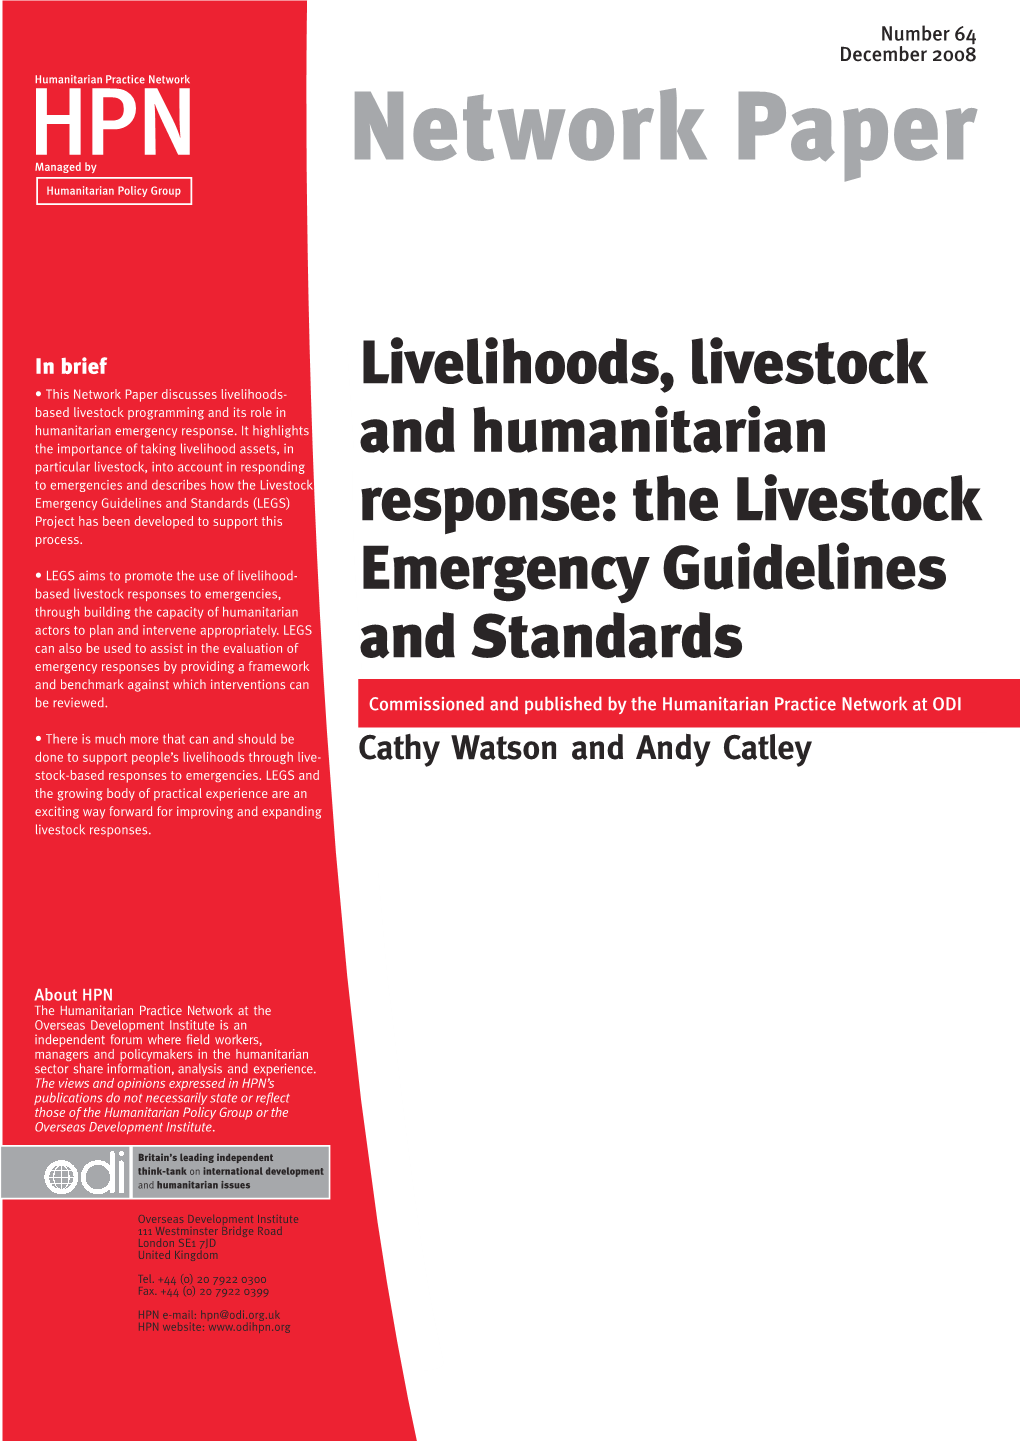 Livelihoods, Livestock and Humanitarian Response: the Livestock Emergency Guidelines and Standards